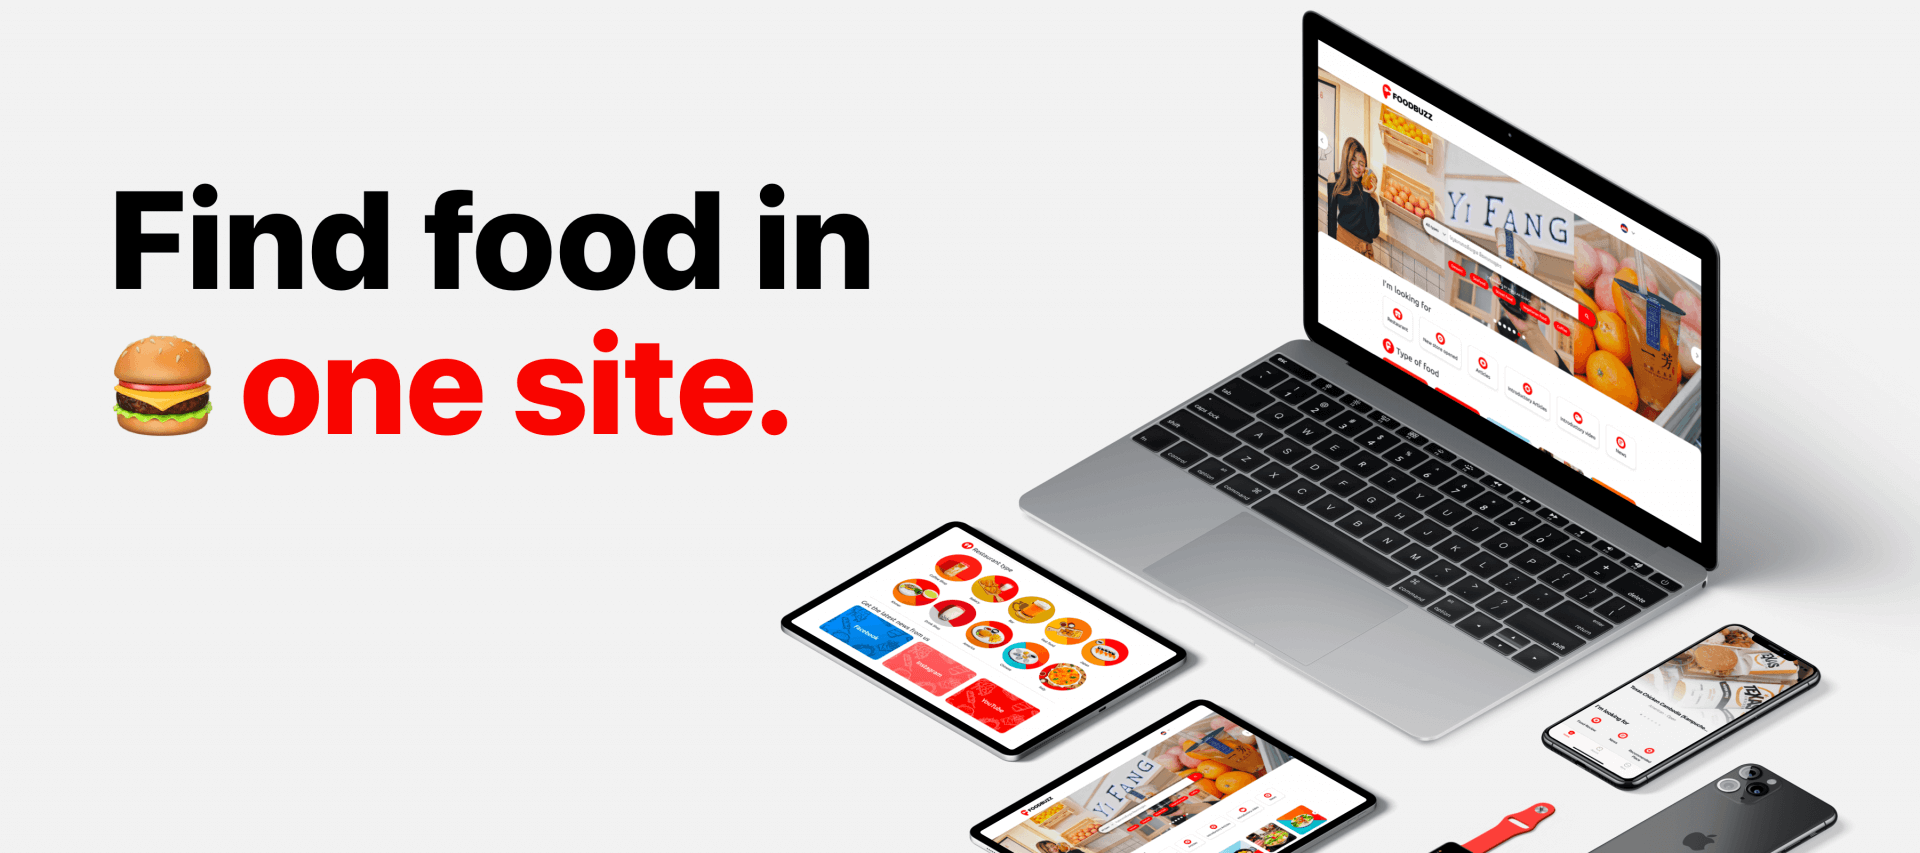 Find food you love in one place.